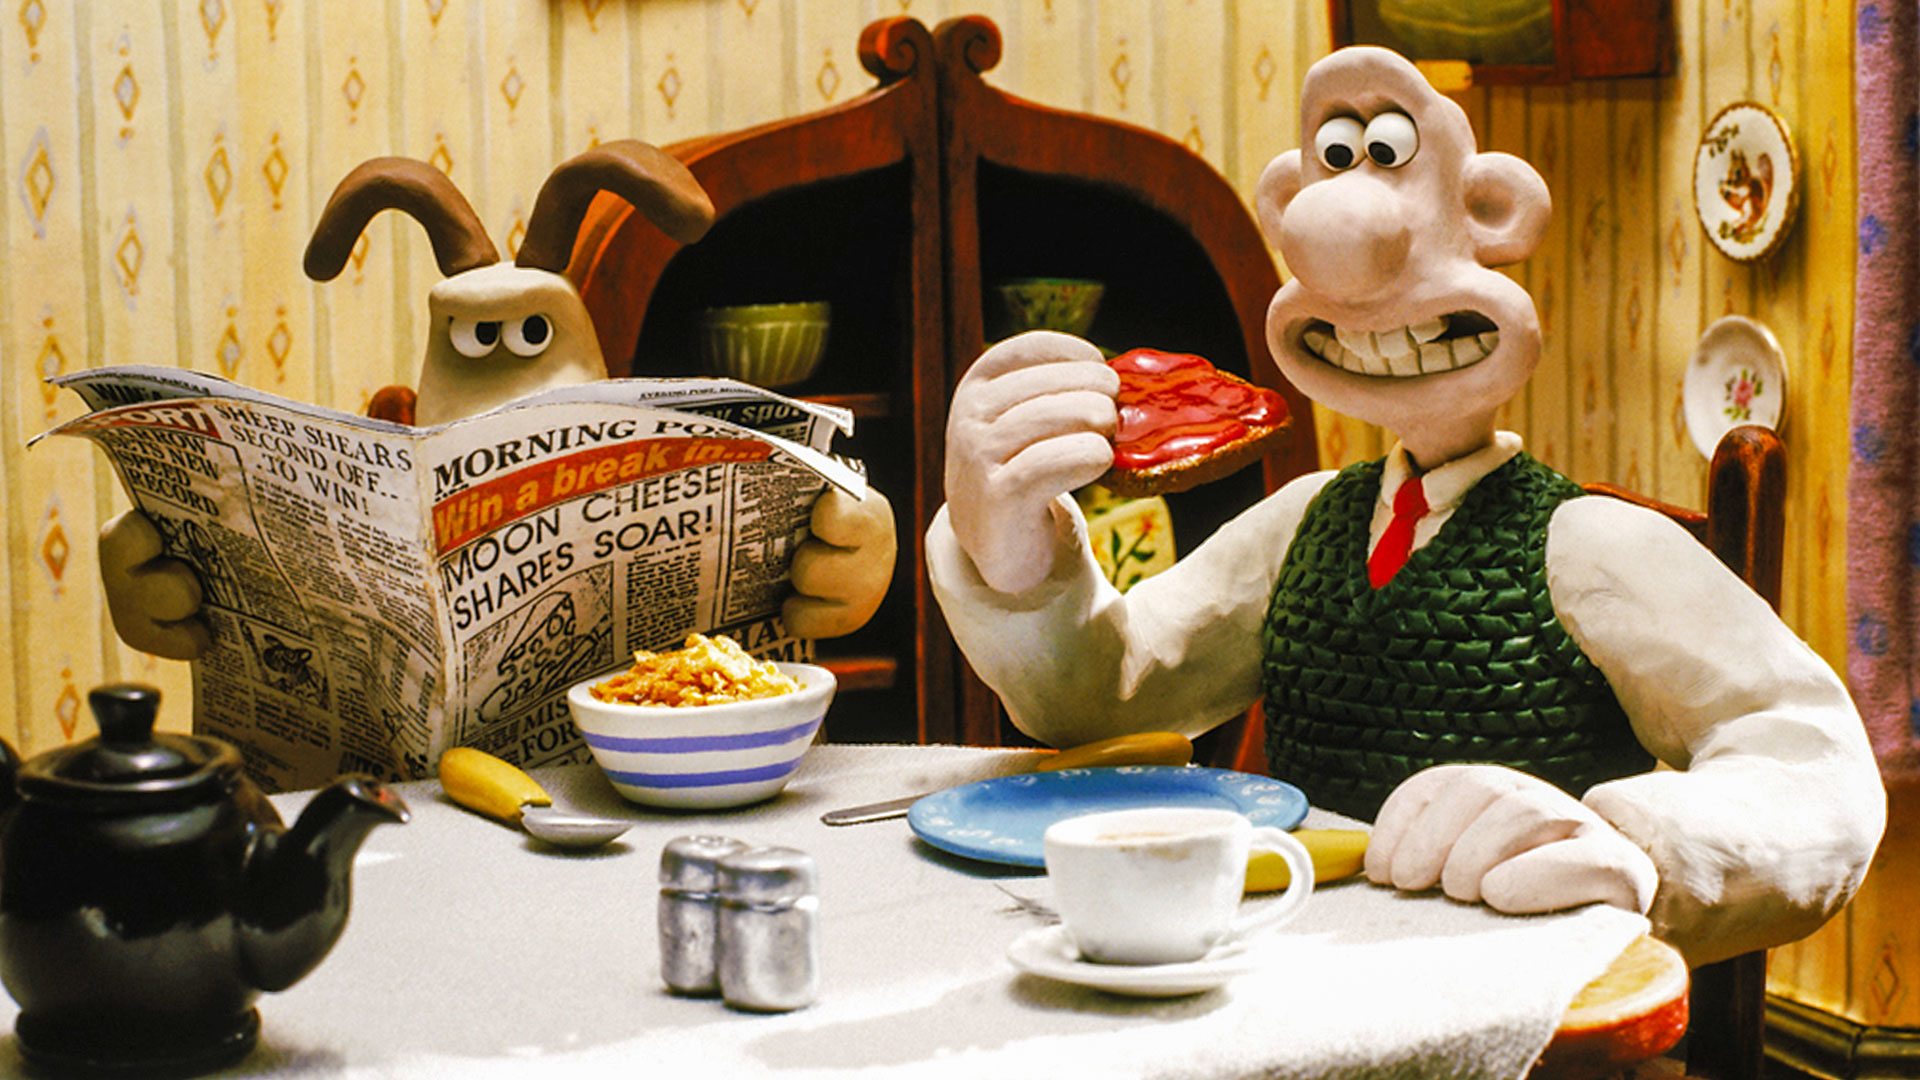 A new Wallace & Gromit film is coming to BBC One TellyMix